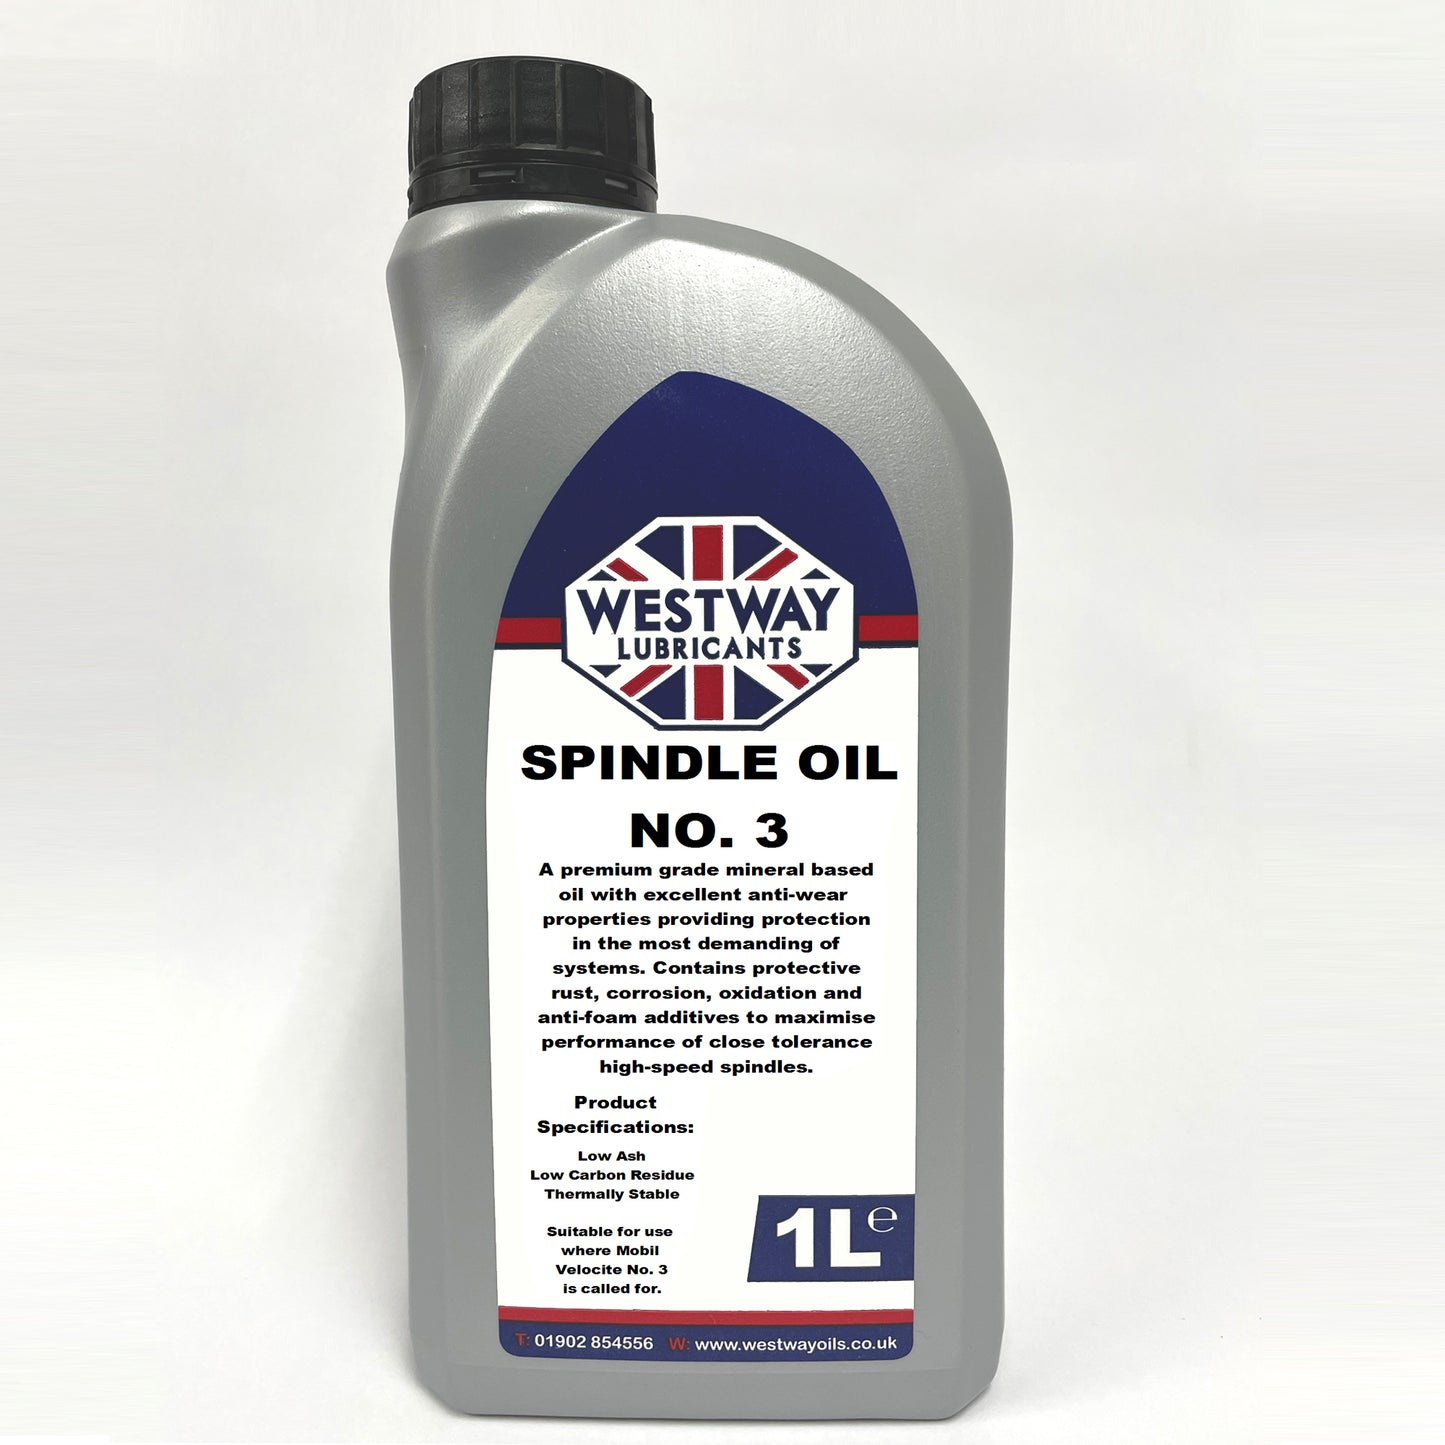 Spindle Oil No. 3 Equivalent to Mobil Velocite 3